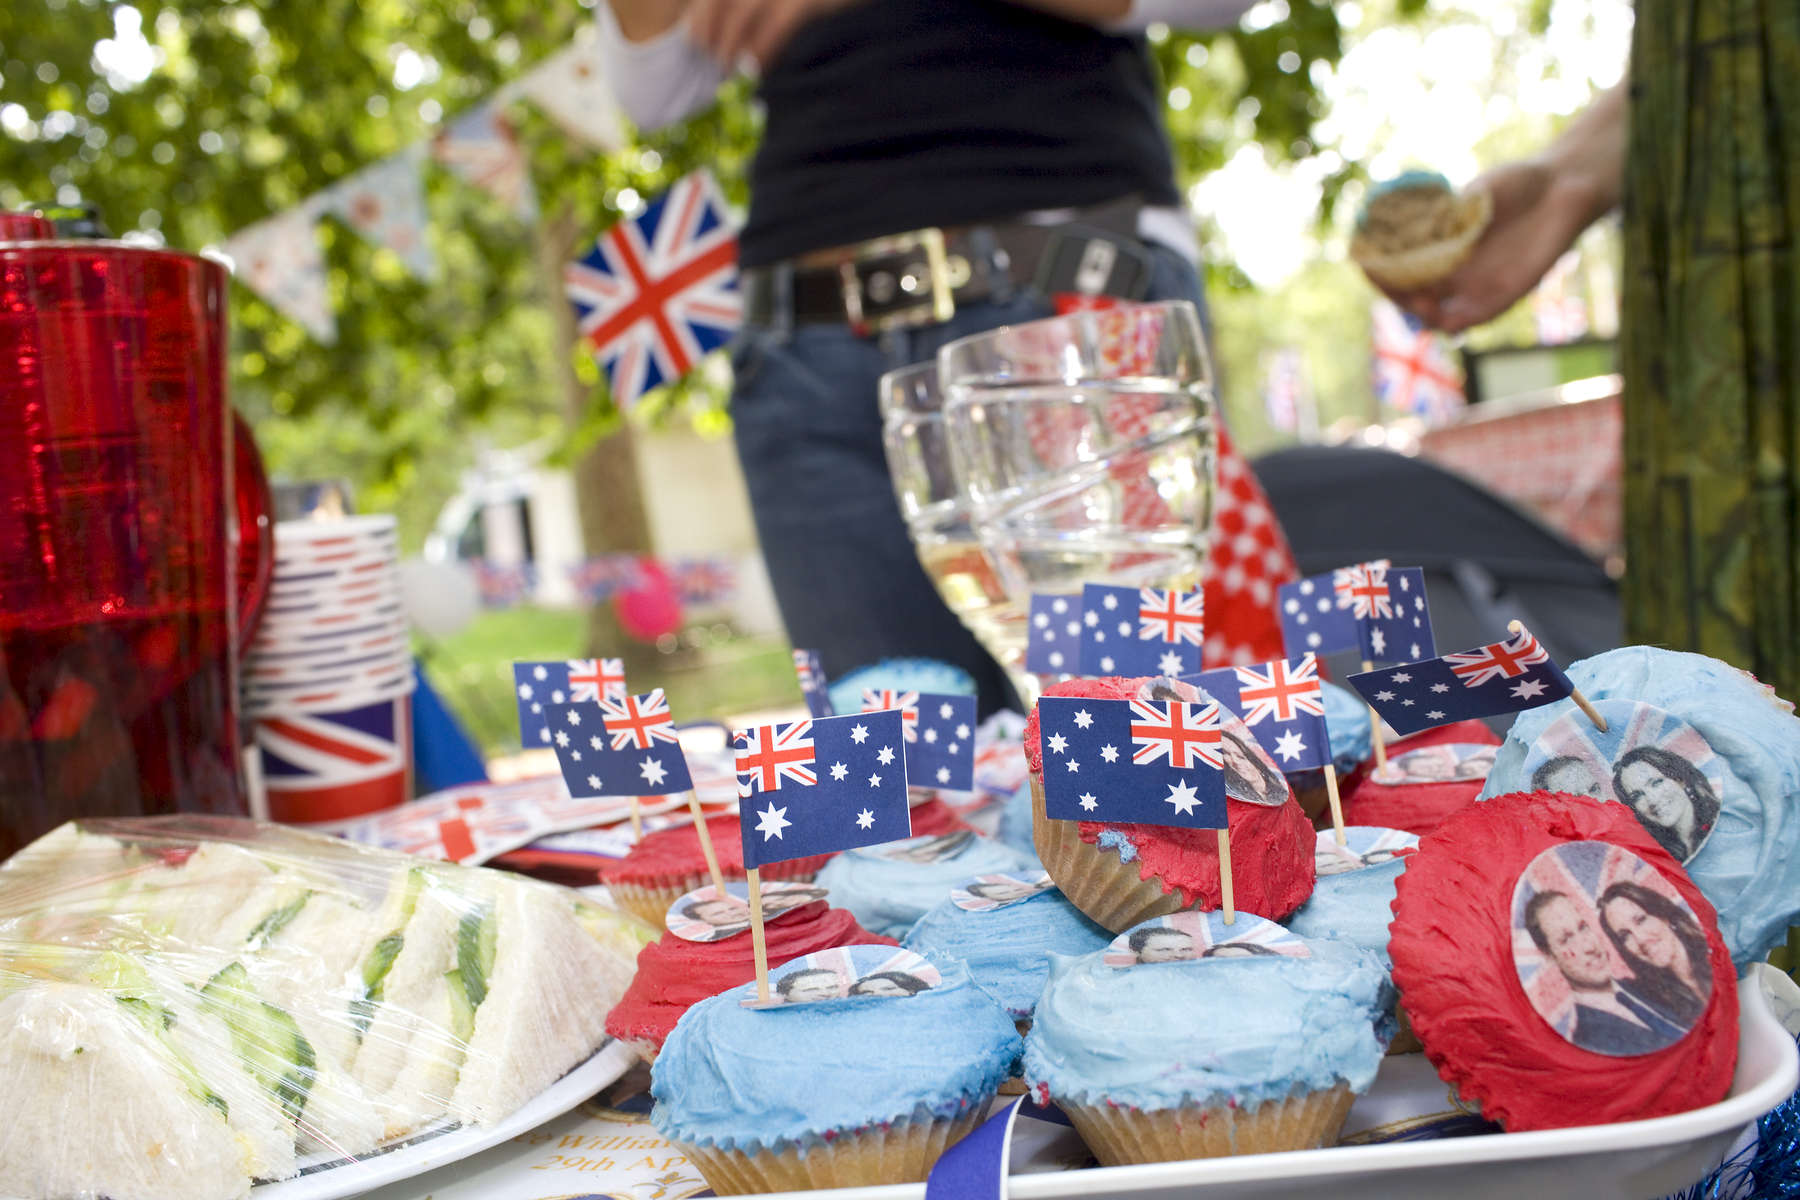 Cakes for high tea at a picnic on the Mall for a group of New Zealand royal supporters.